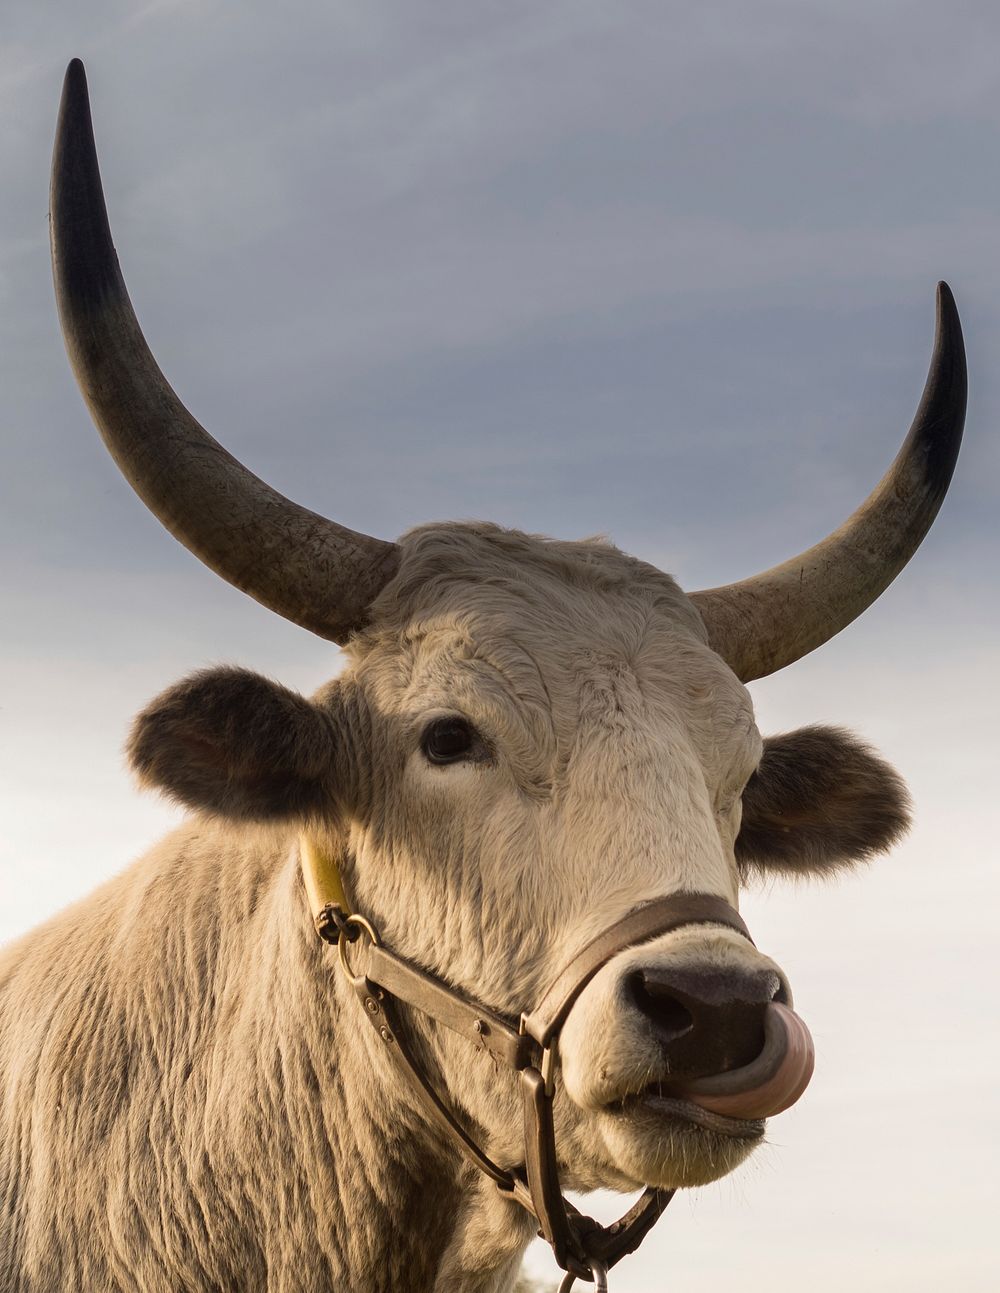 Free bull cow licking its nose image, public domain animal CC0 photo.